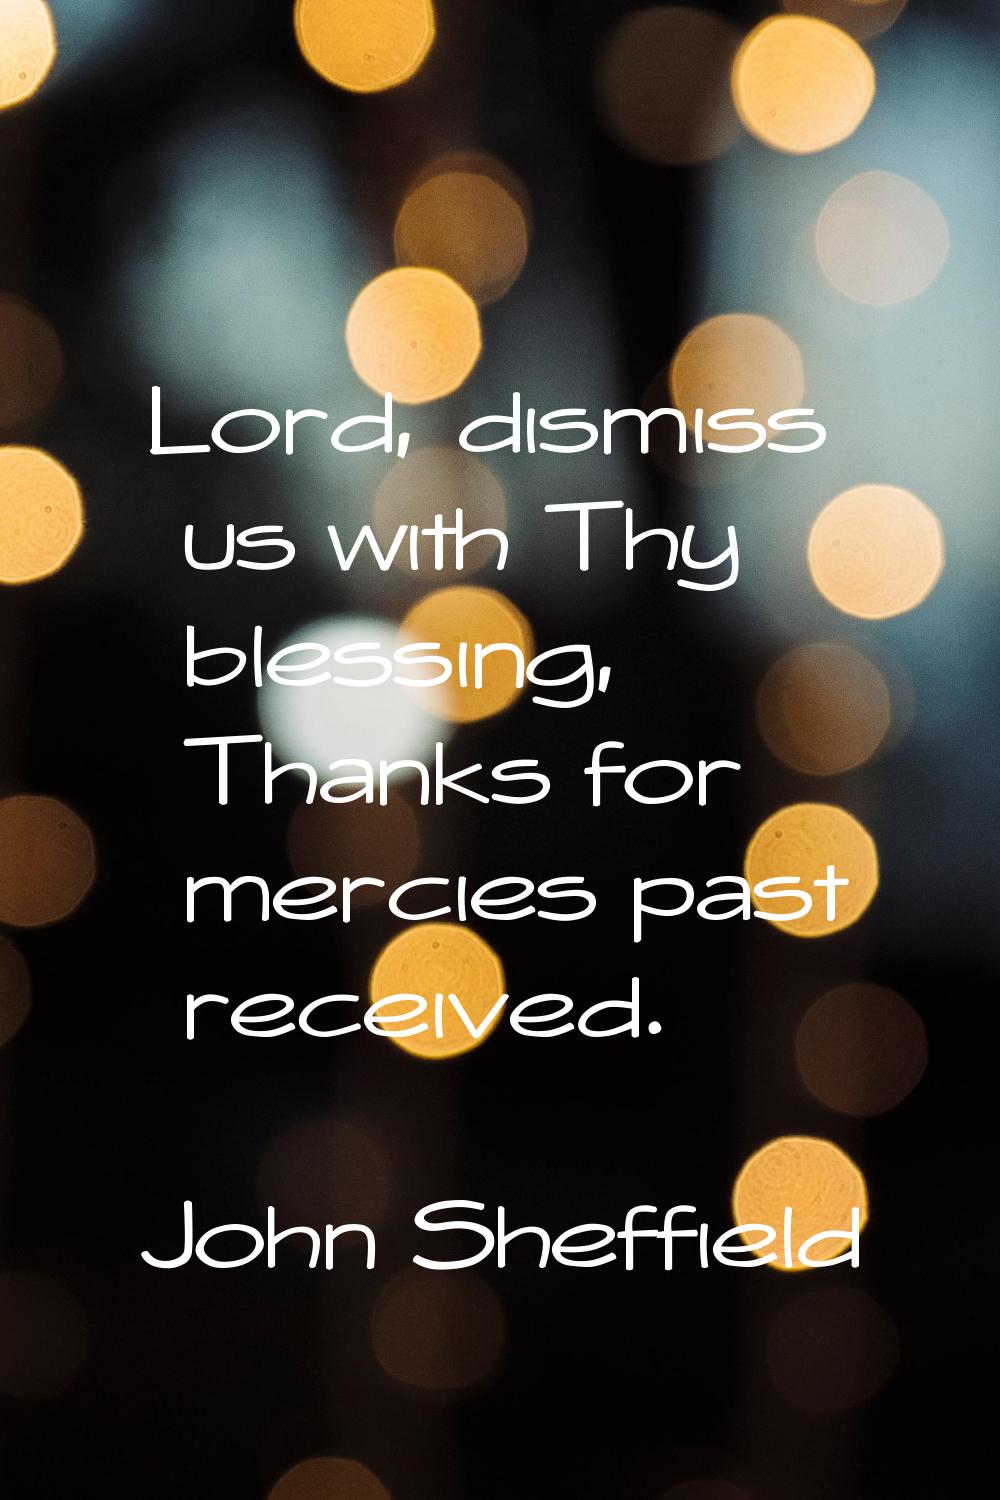 Lord, dismiss us with Thy blessing, Thanks for mercies past received.